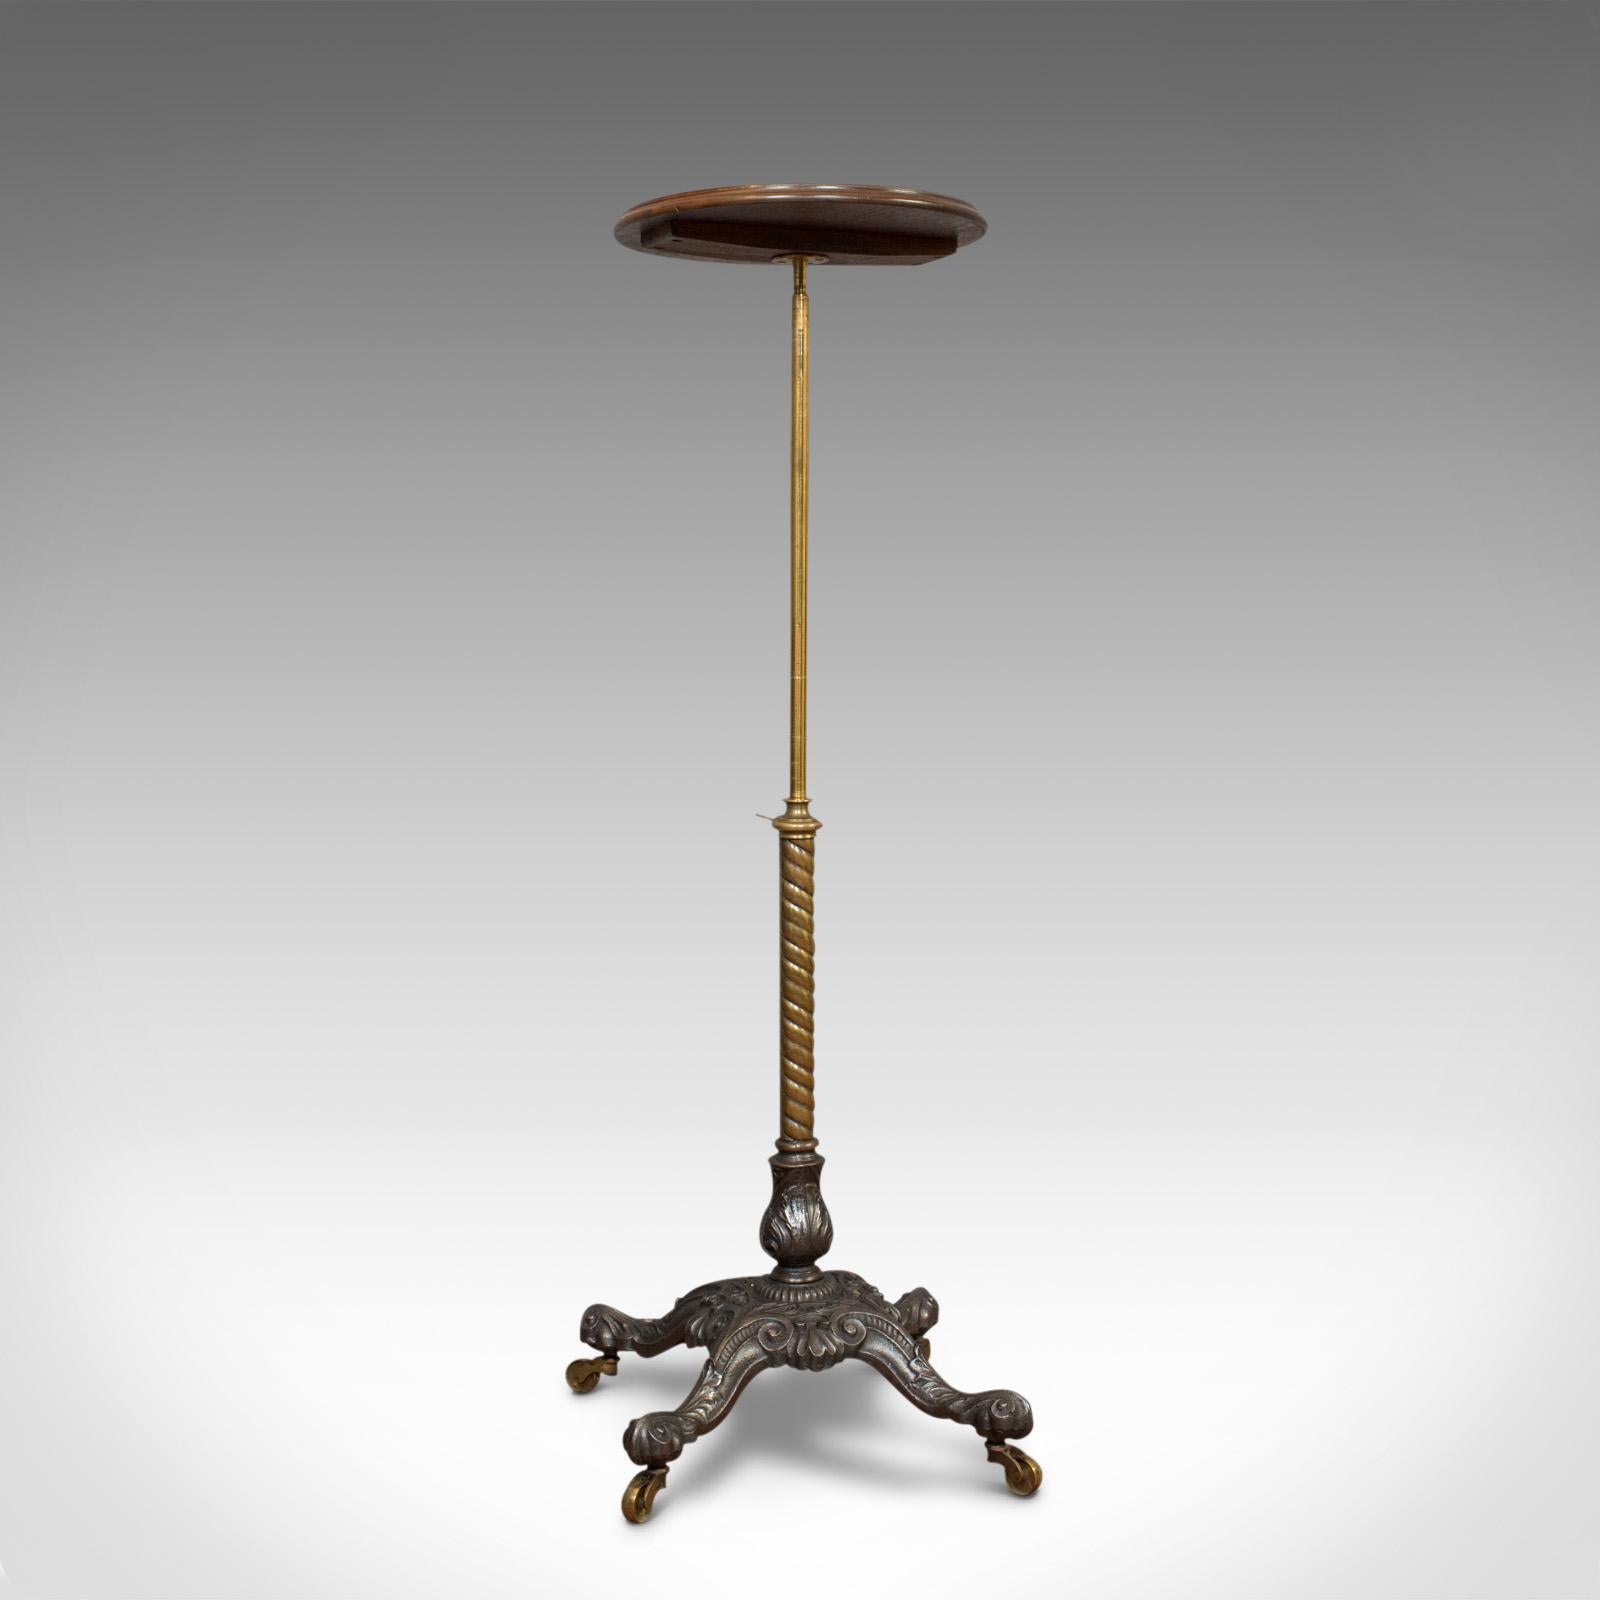 This is an antique adjustable wine table. An English, mahogany and cast iron plant stand or jardiniere and dating to the Victorian period, circa 1860.

Generously adjustable and of pleasing form
Mahogany and cast iron displays a desirable aged